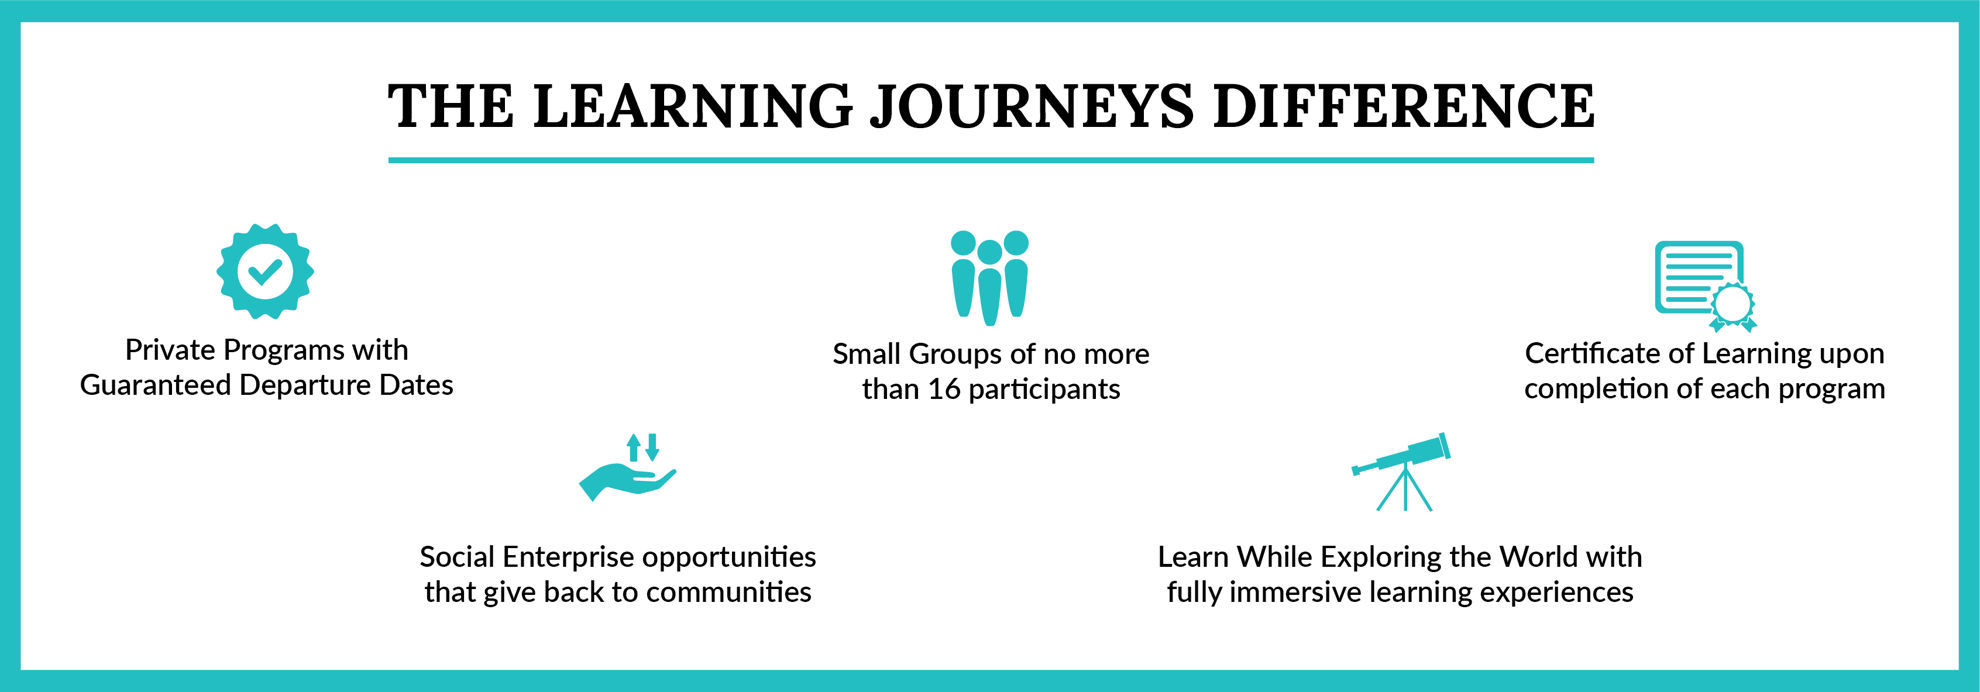 graphic of the learning journeys difference